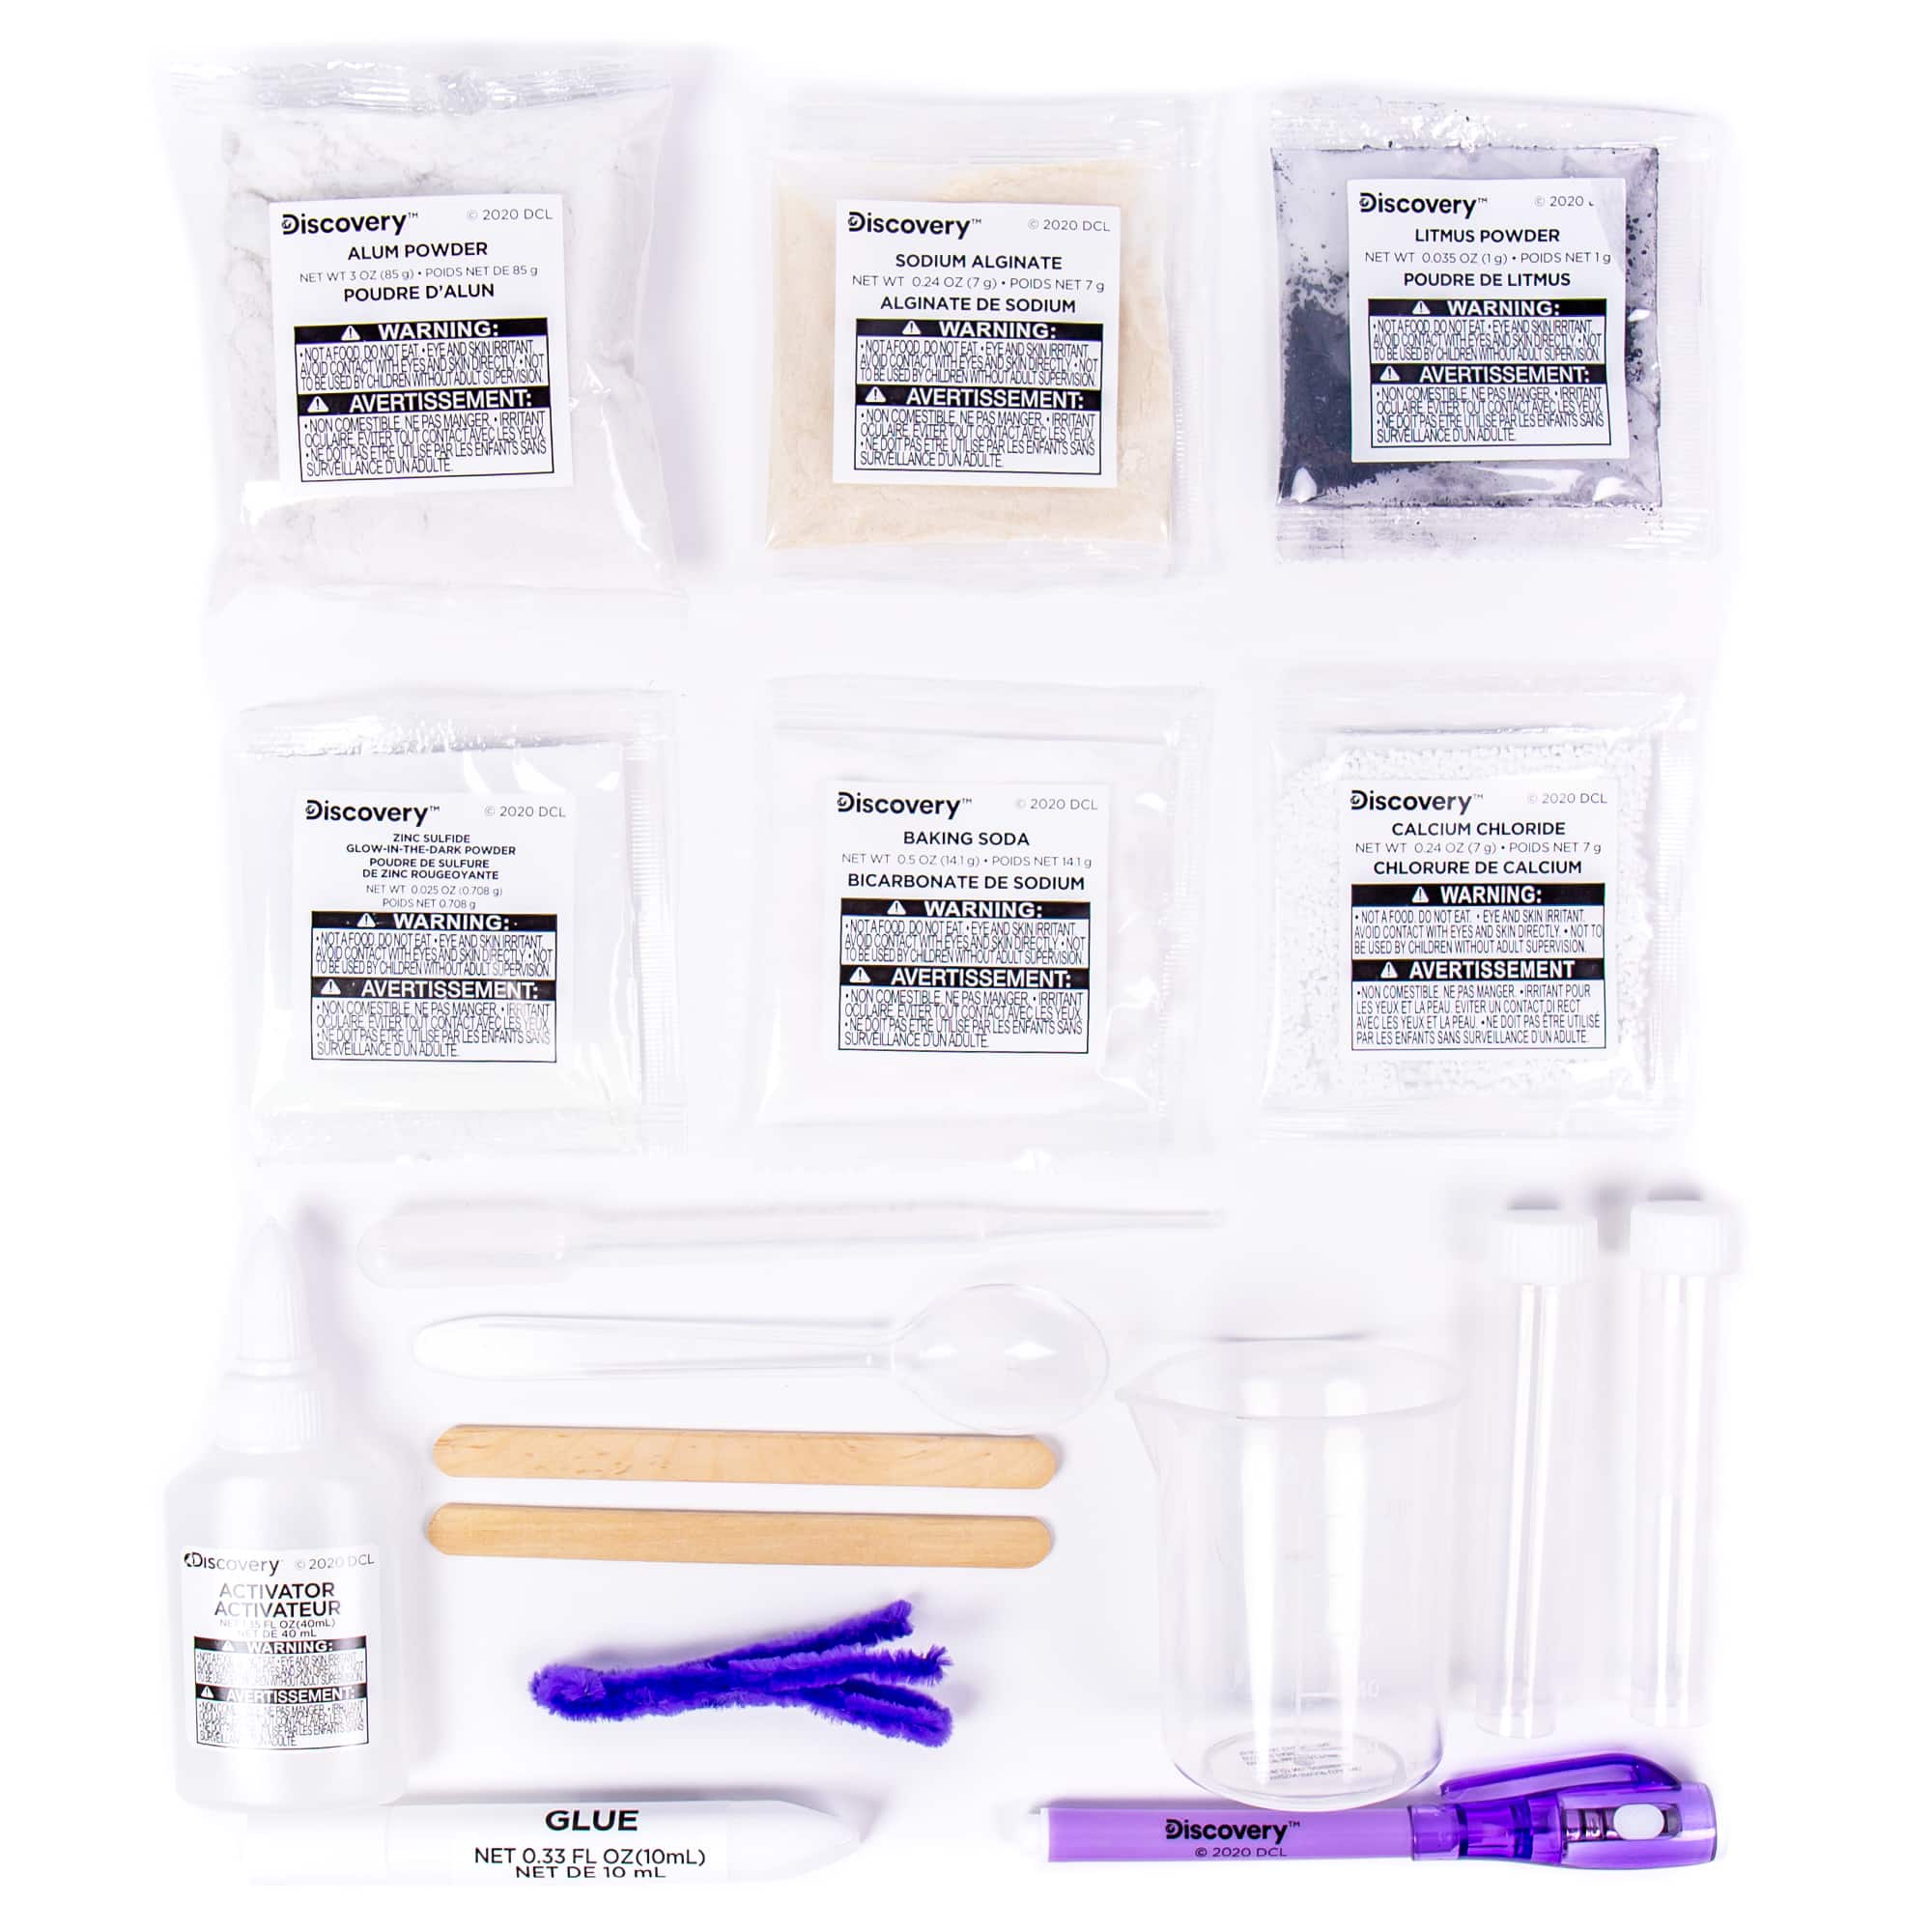 Discovery&#x2122; Extreme Chemistry Kit